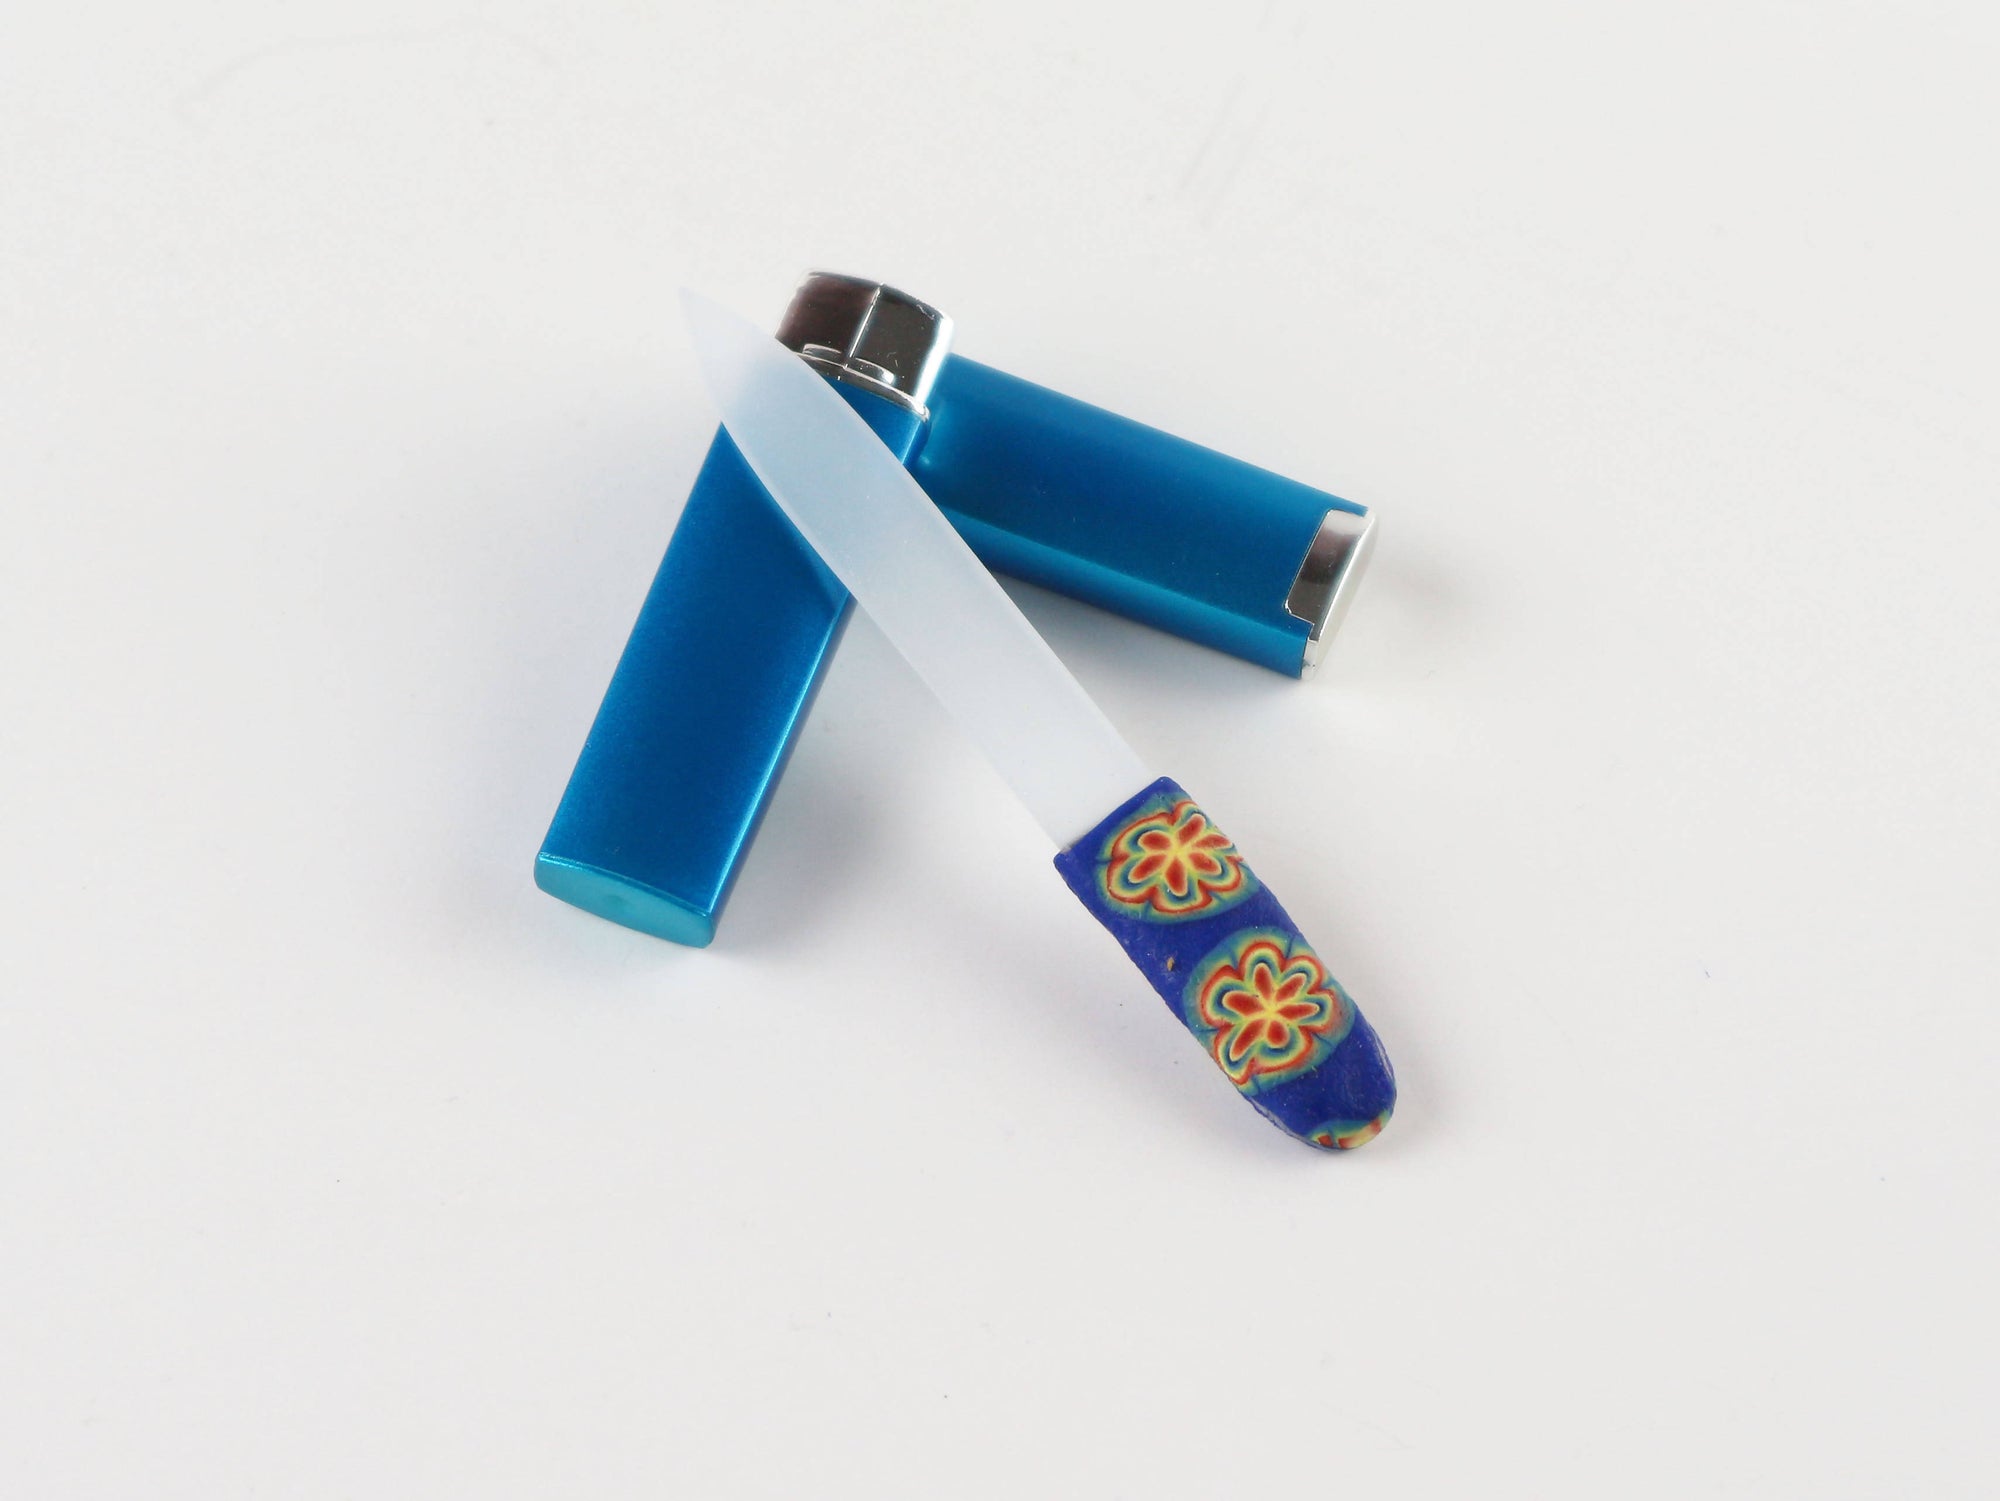 Free Shipping- Crystal Nail File w/ Hard Case- Blue with Rainbow Flower with Turquoise Case